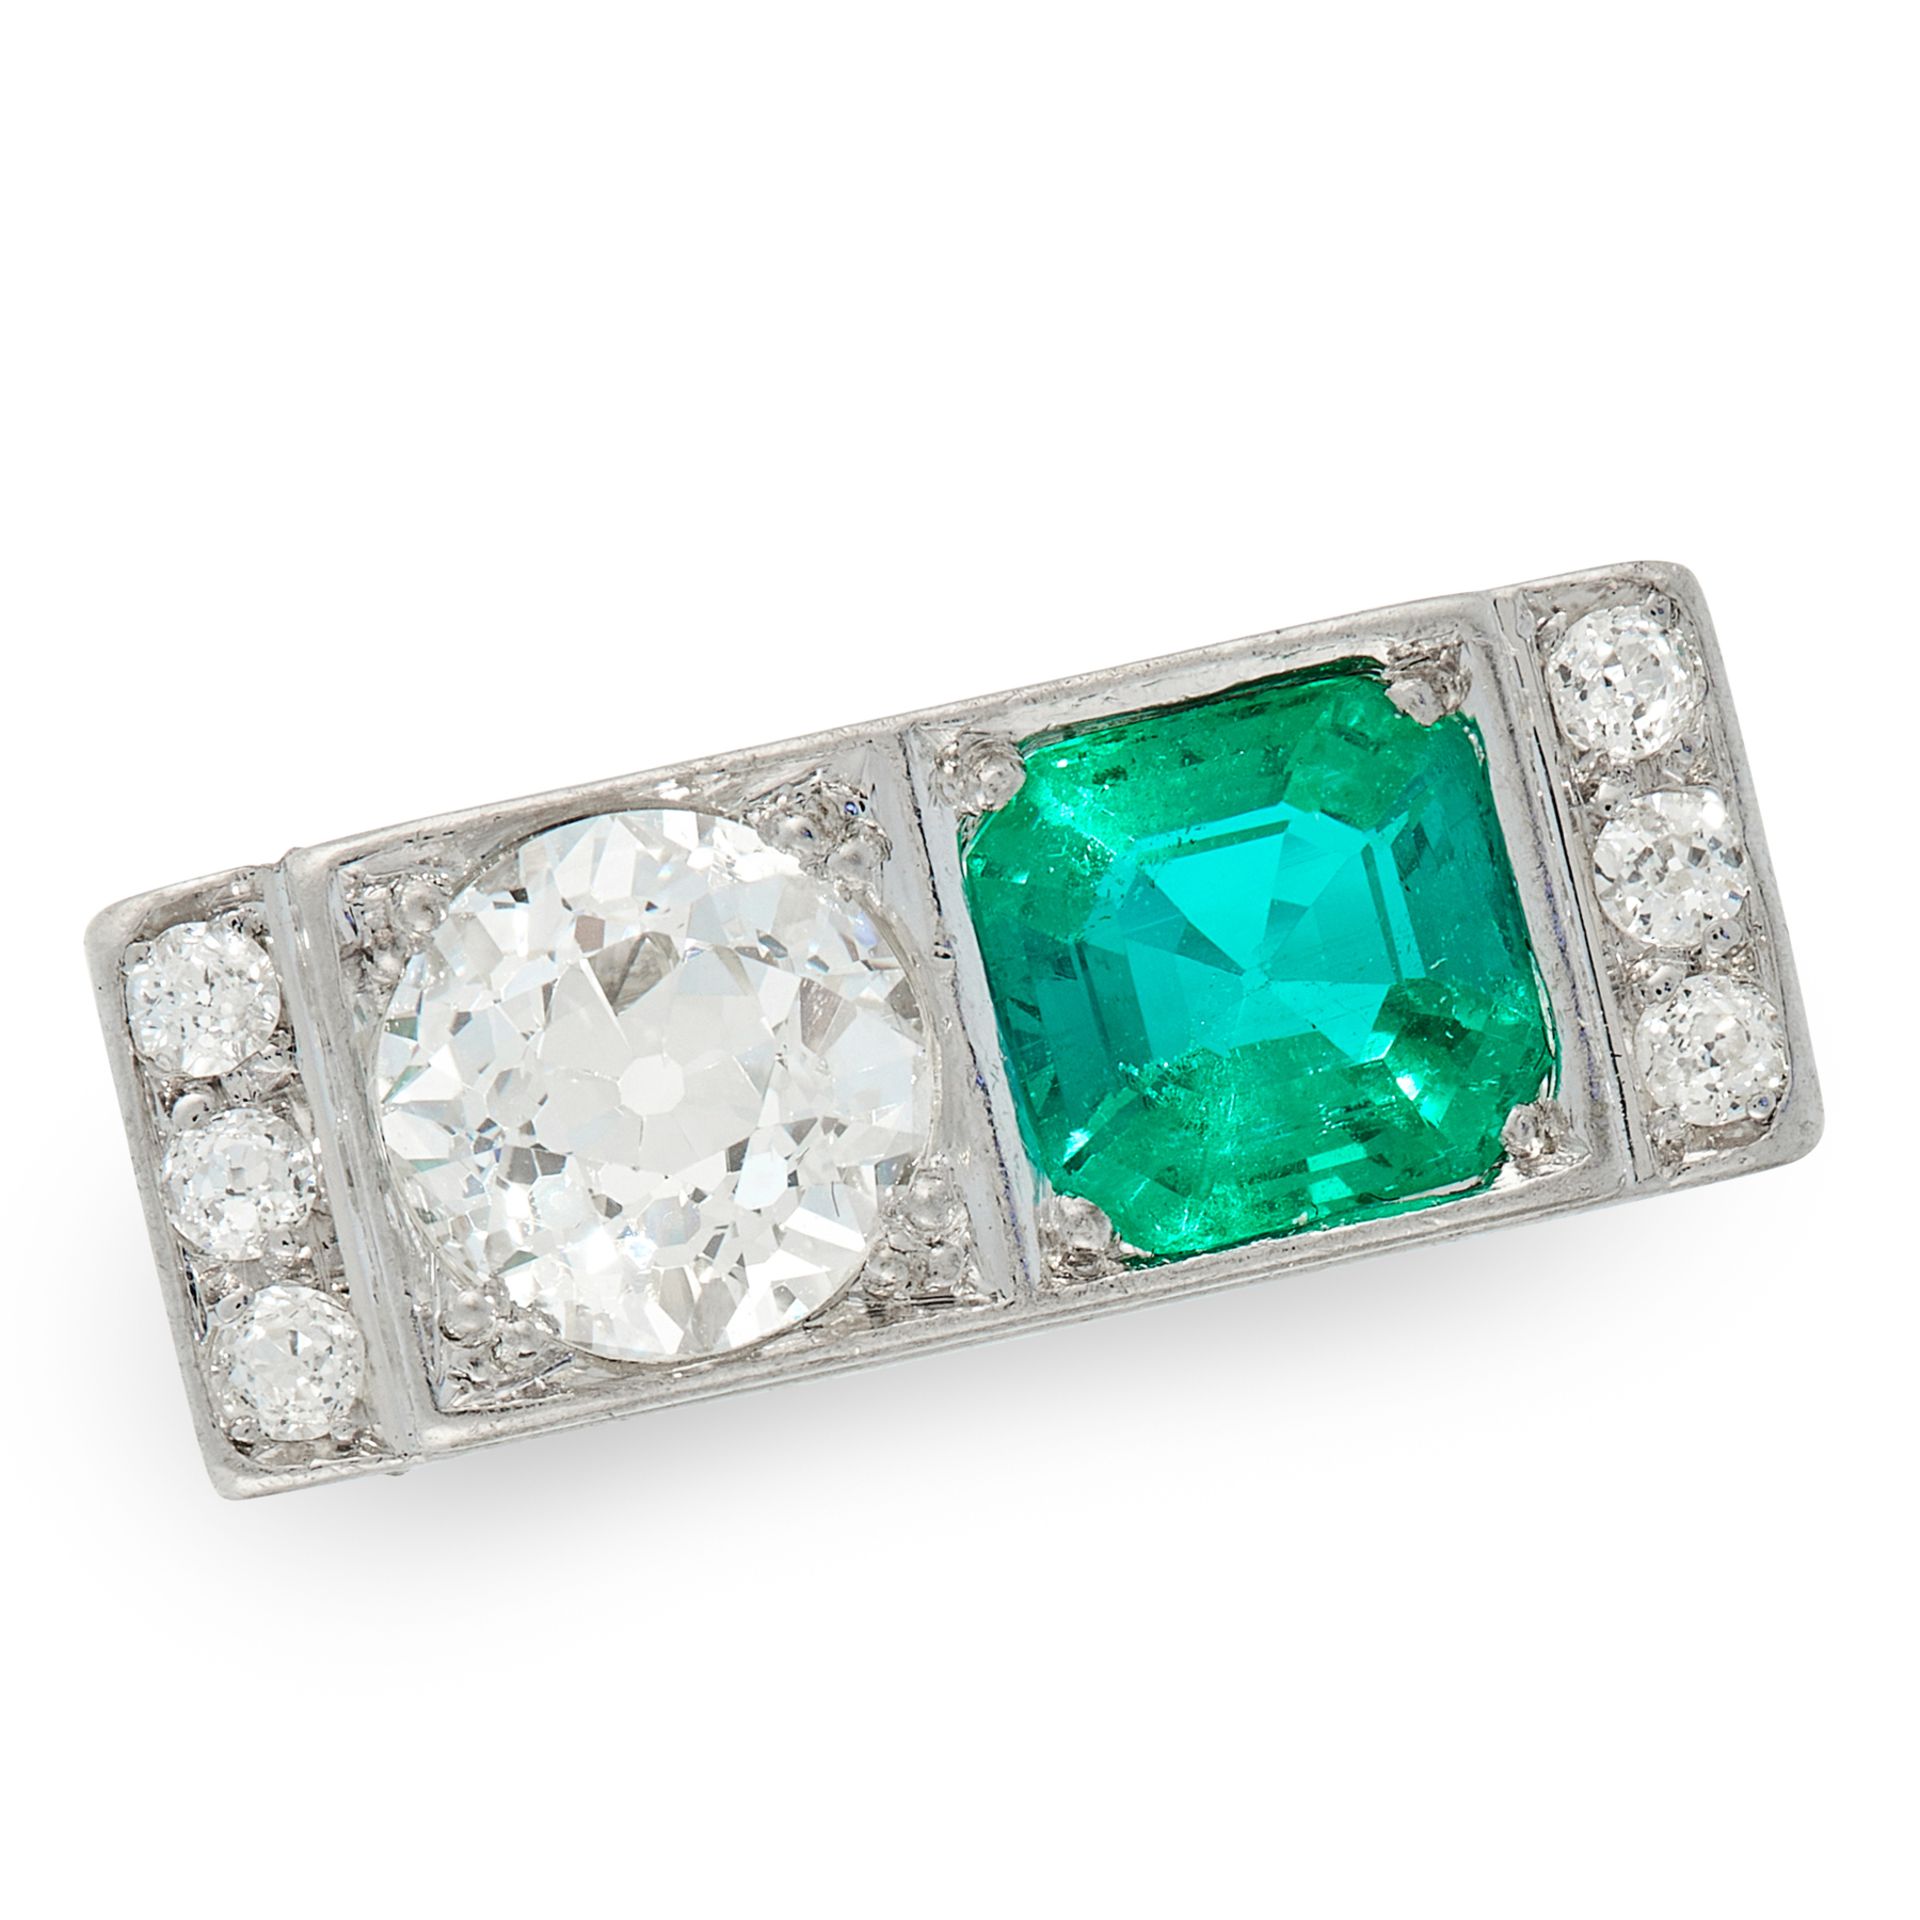 AN ART DECO COLOMBIAN EMERALD AND DIAMOND RING the rectangular face set with an emerald cut - Image 2 of 2